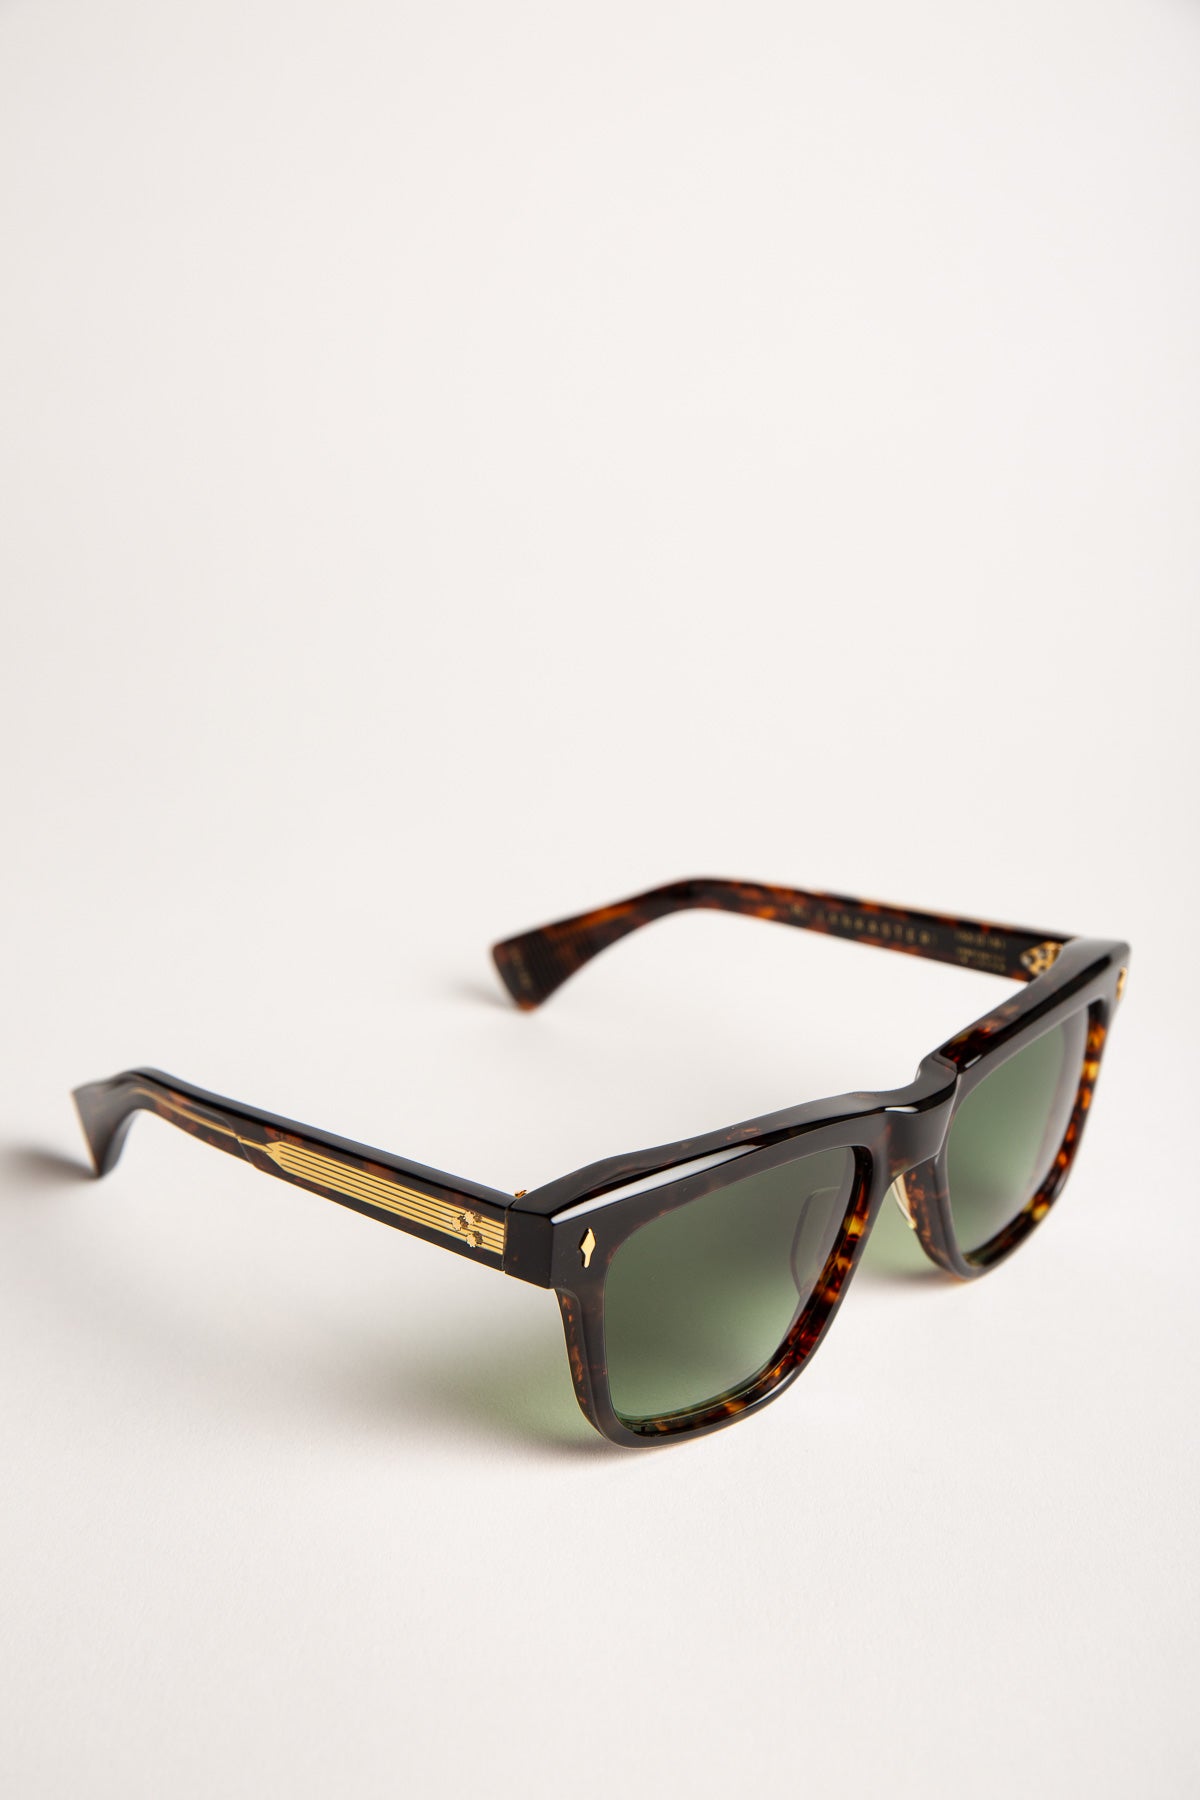 JACQUES MARIE MAGE | LANKASTER SUNGLASSES